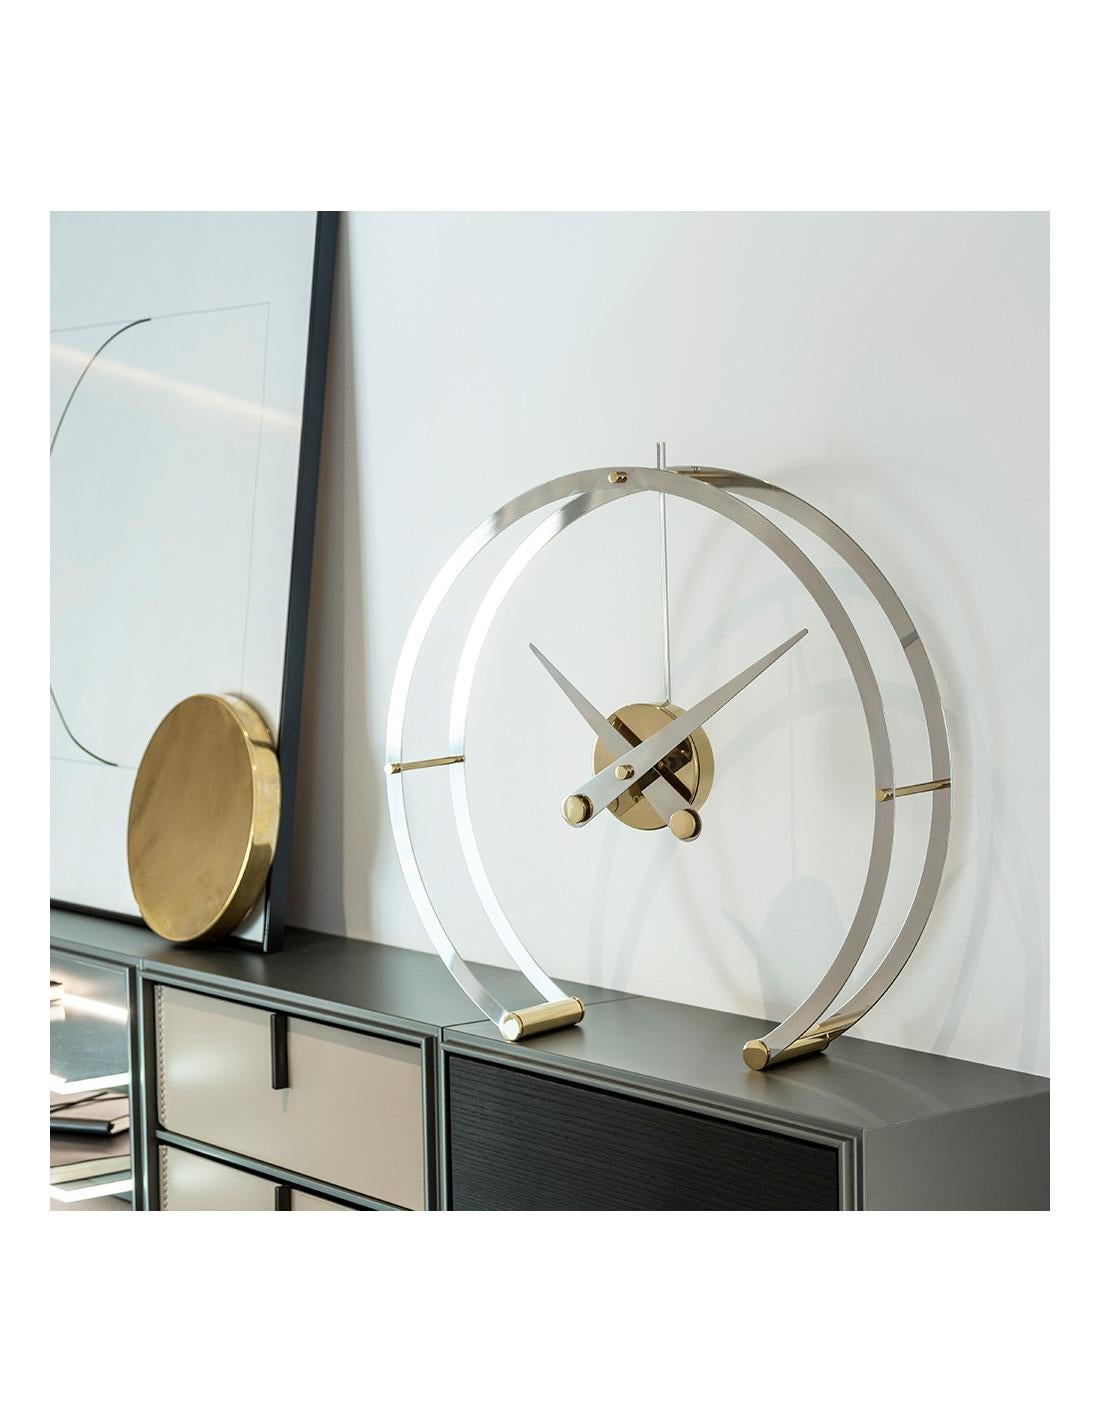 The Omega G Clock impresses by keeping a clock suspended in the air while losing its depth by removing unnecessary items and making it simple and glamorous .
Omega G table clock : Rings and hands in stainless steel with gold details, box in